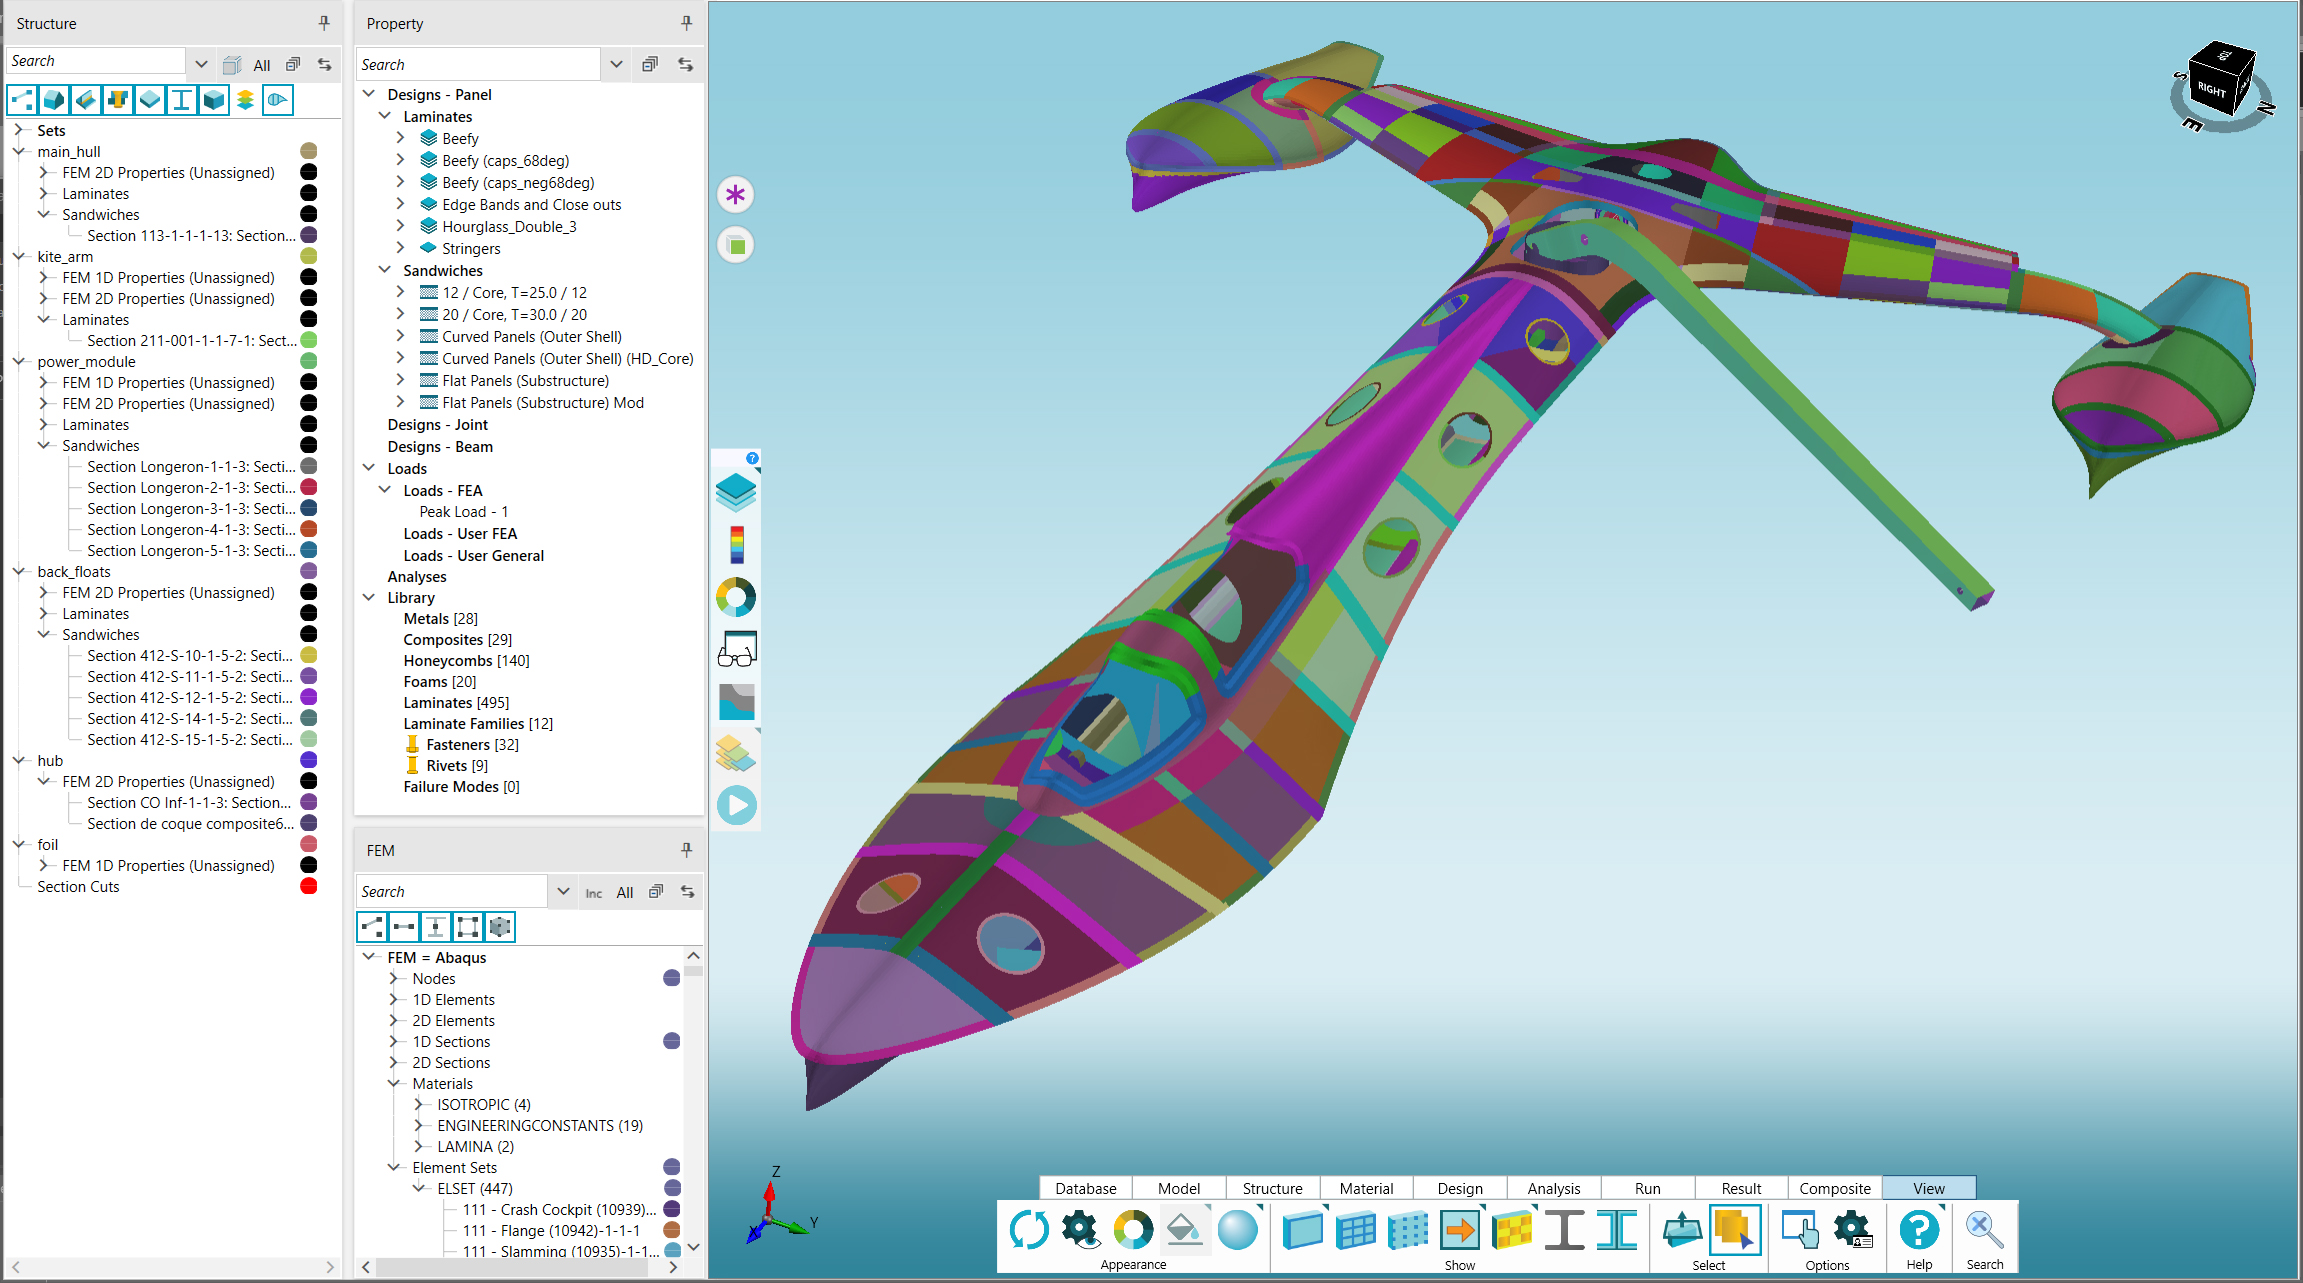 Collier Aerospace Launches All-new HyperX® Structural Analysis and Design Software for Composites at JEC World 2022